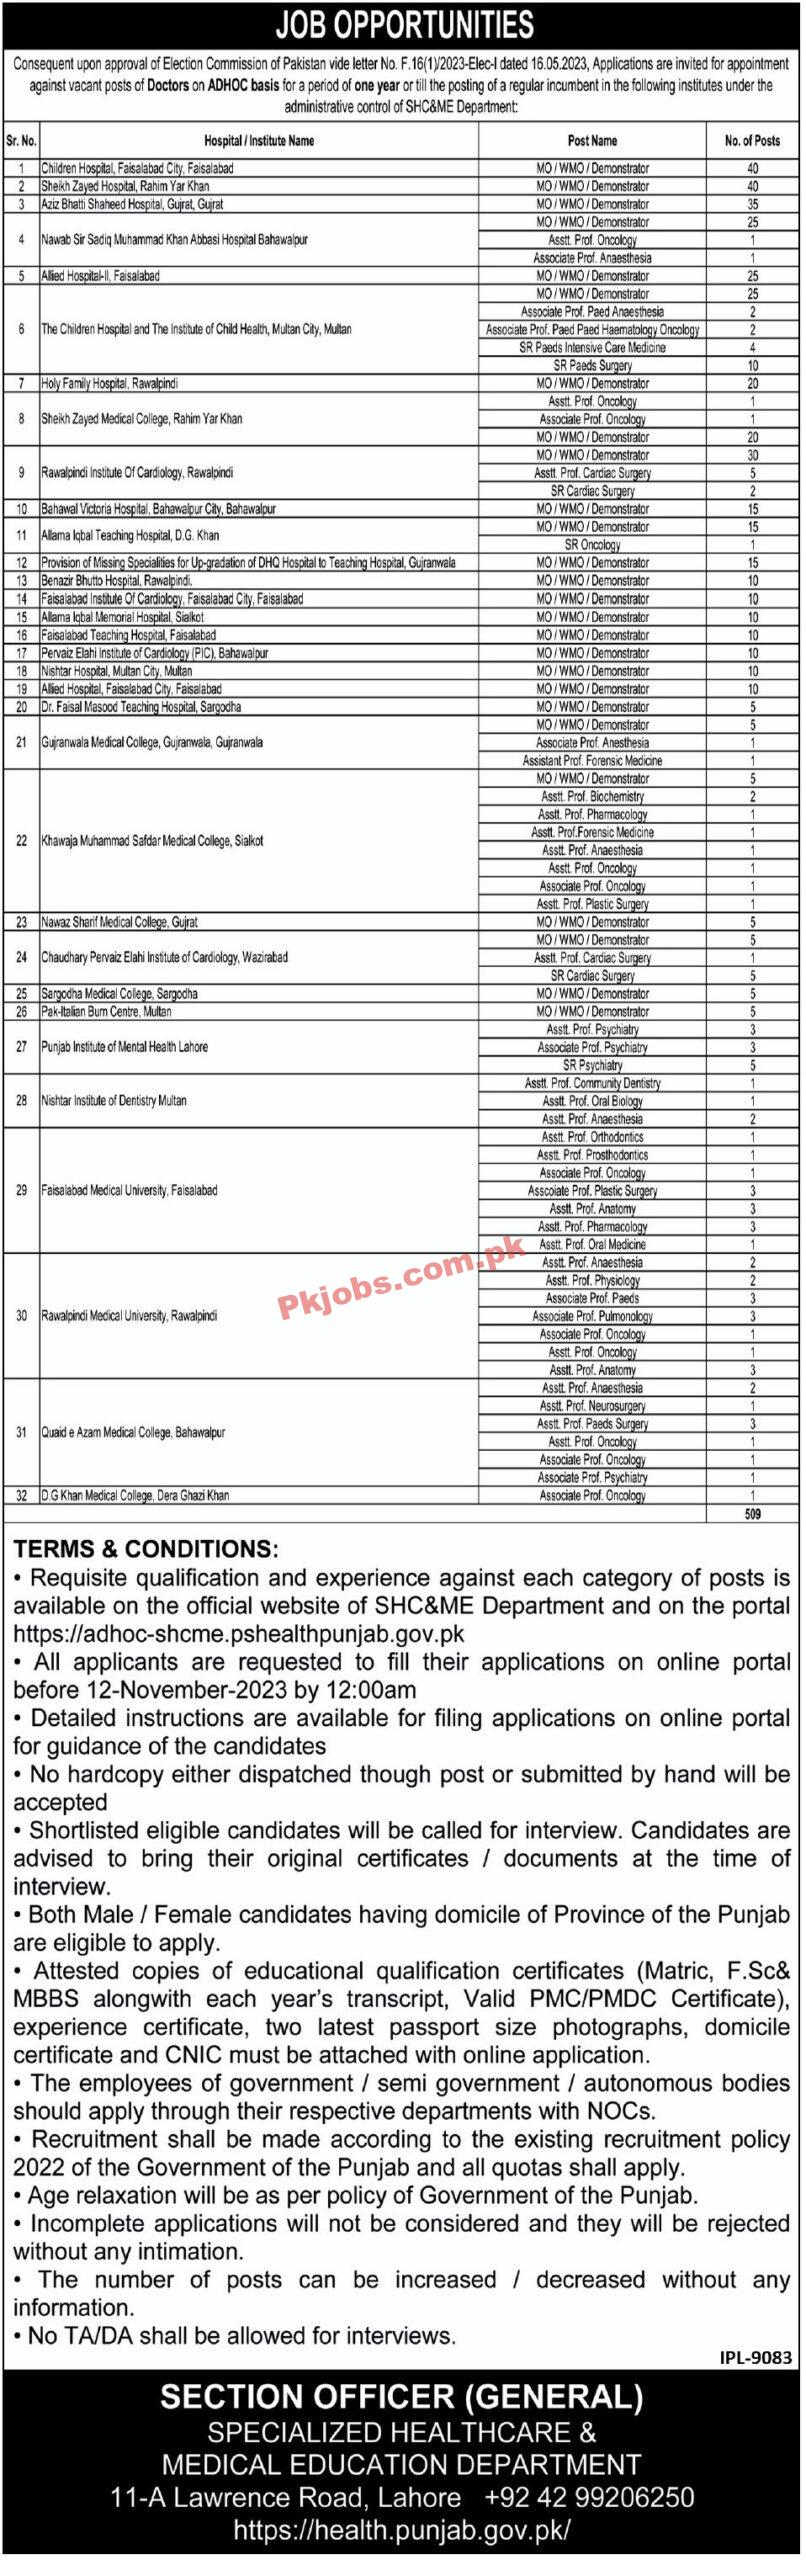 Jobs Vacant at Specialized Healthcare & Medical Education Department 